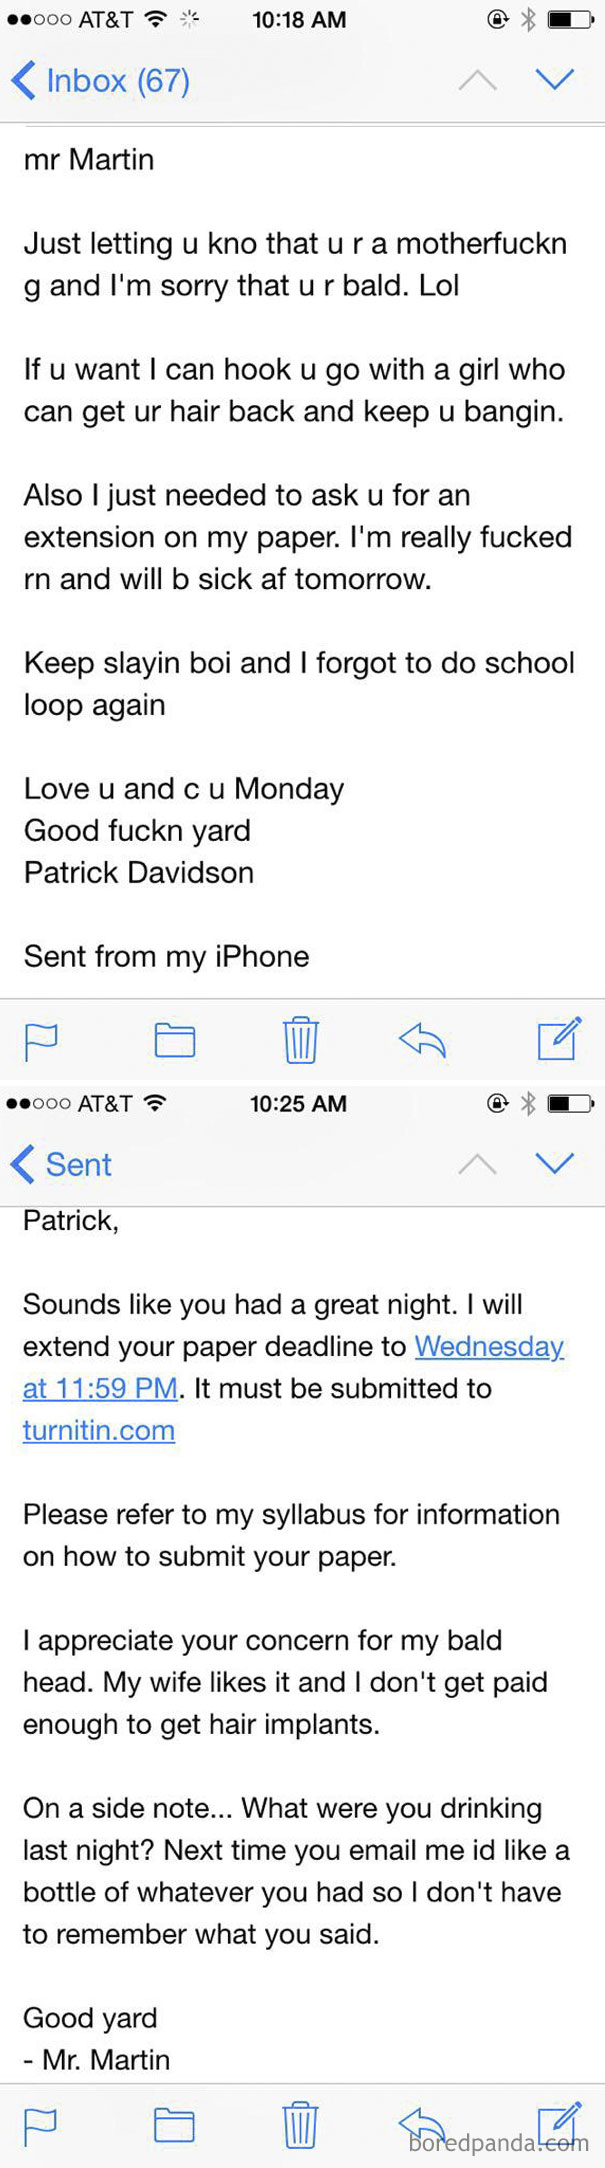 30 Epic Email And Text Fails That People Really Wish To Unsend | Bored Panda